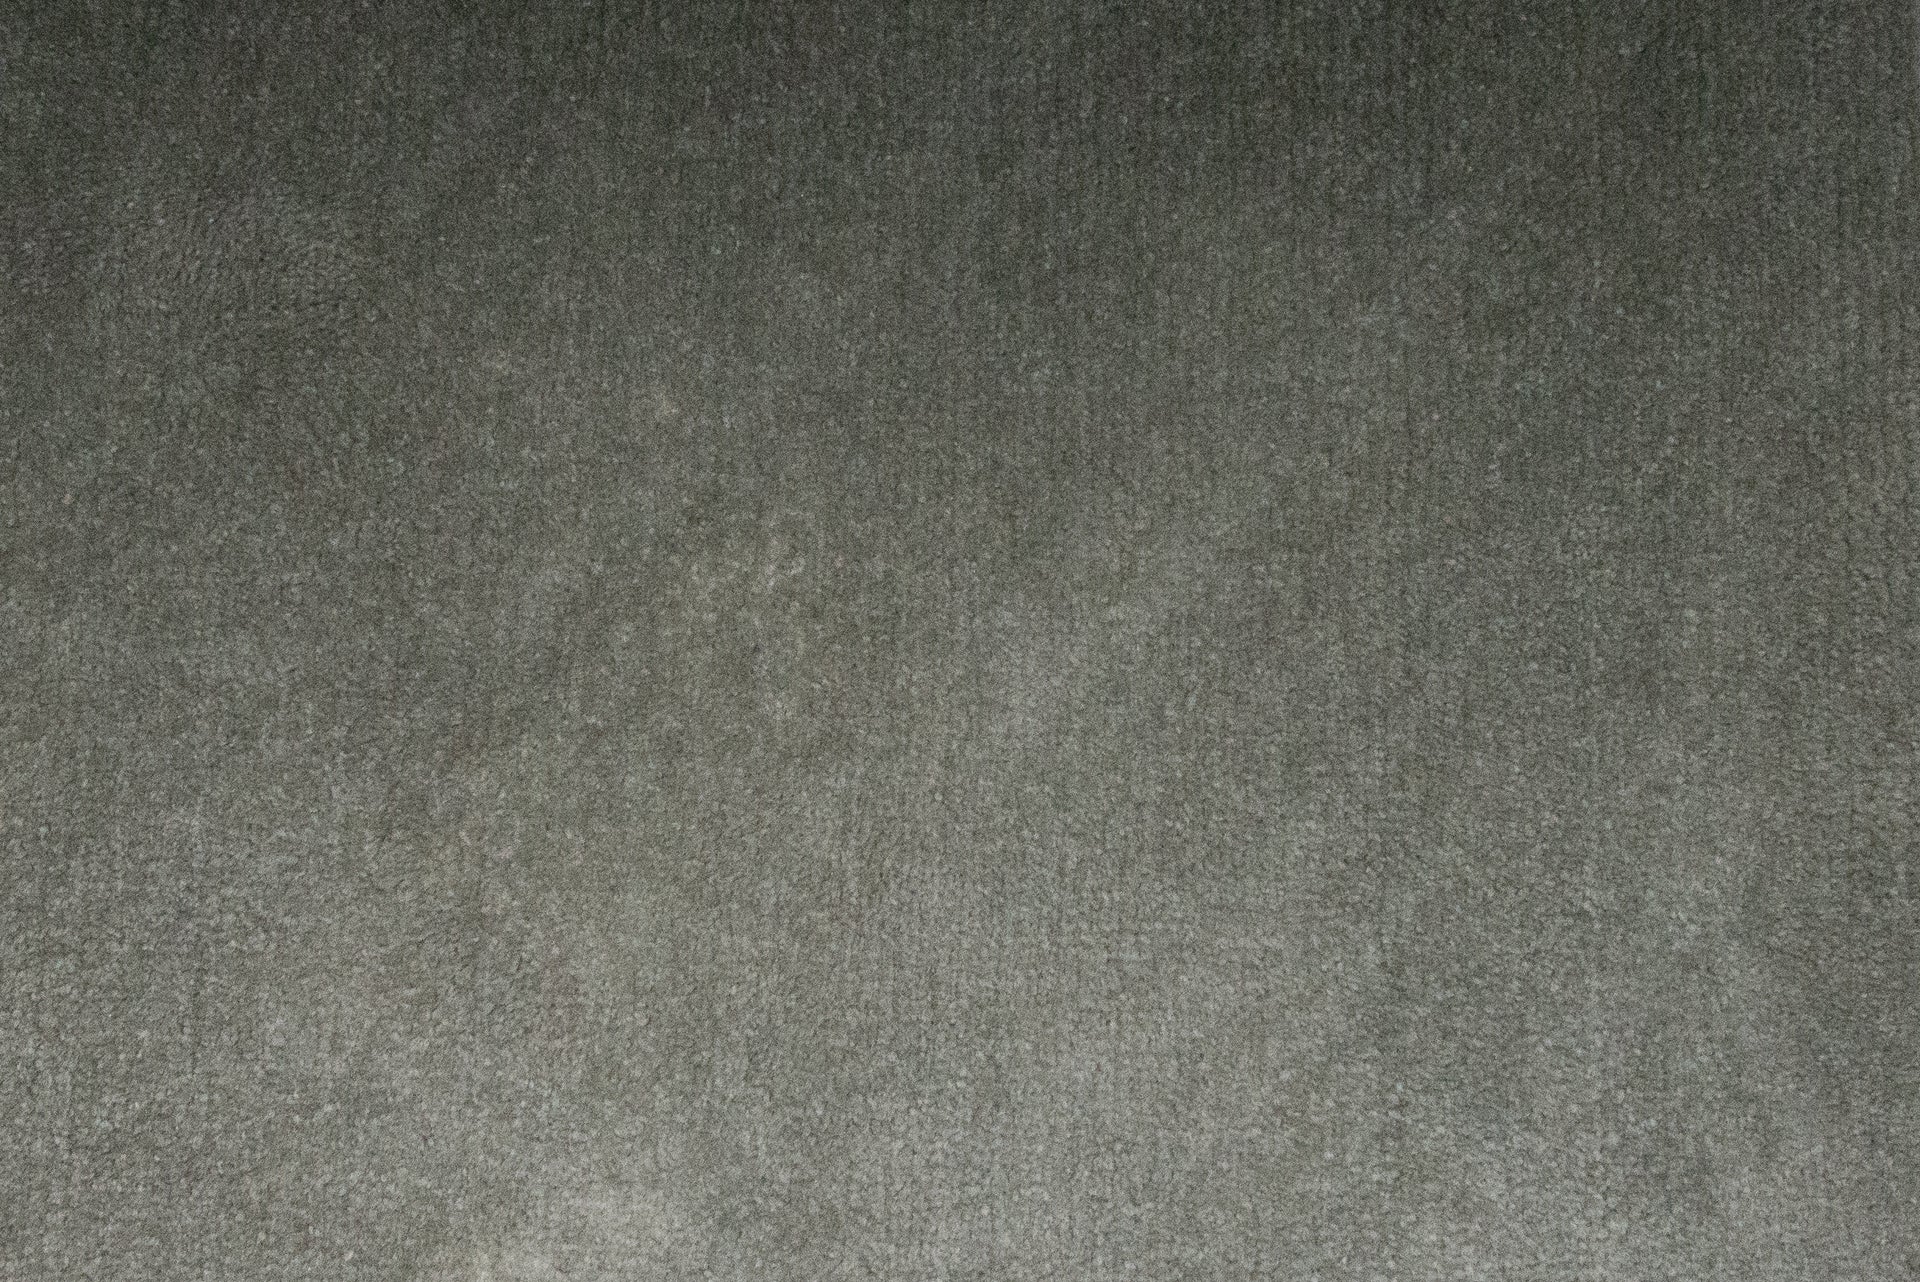 Close up view of a clean carpet, cleaned by Roborock S6 robot vaccum cleaner